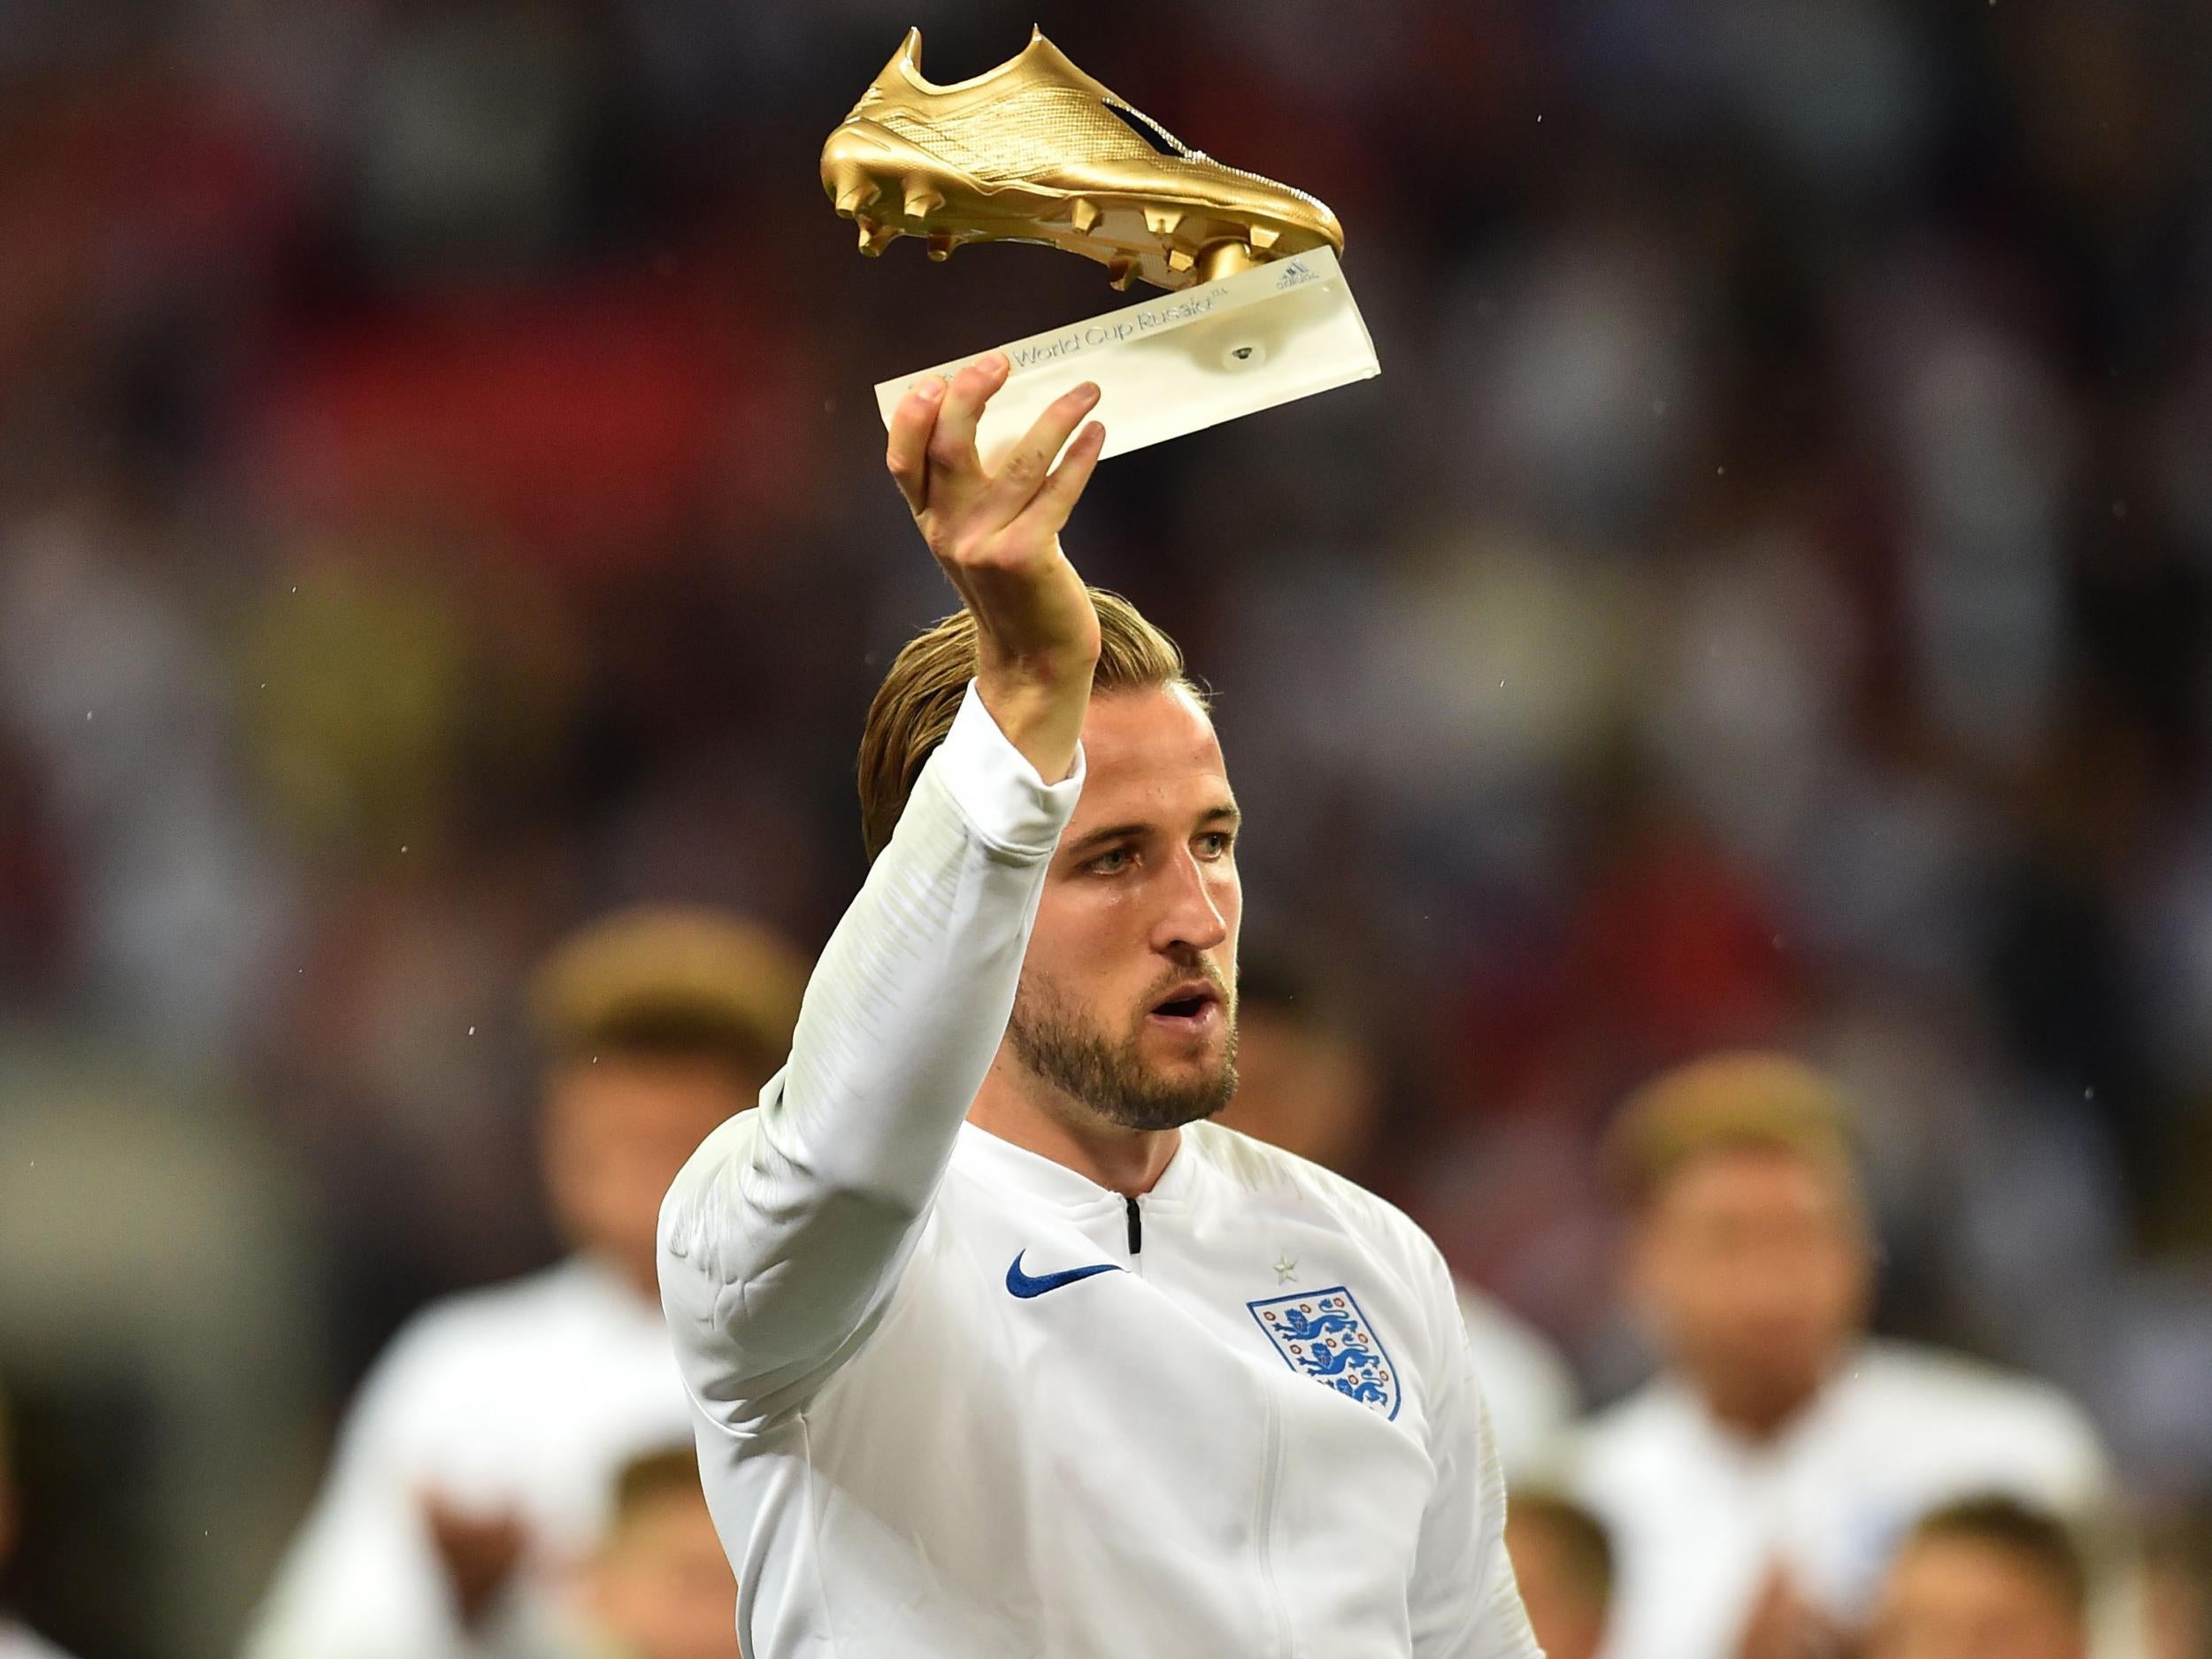 Harry Kane won the Golden Boot at the 2018 Fifa World Cup after finishing as the leading goalscorer